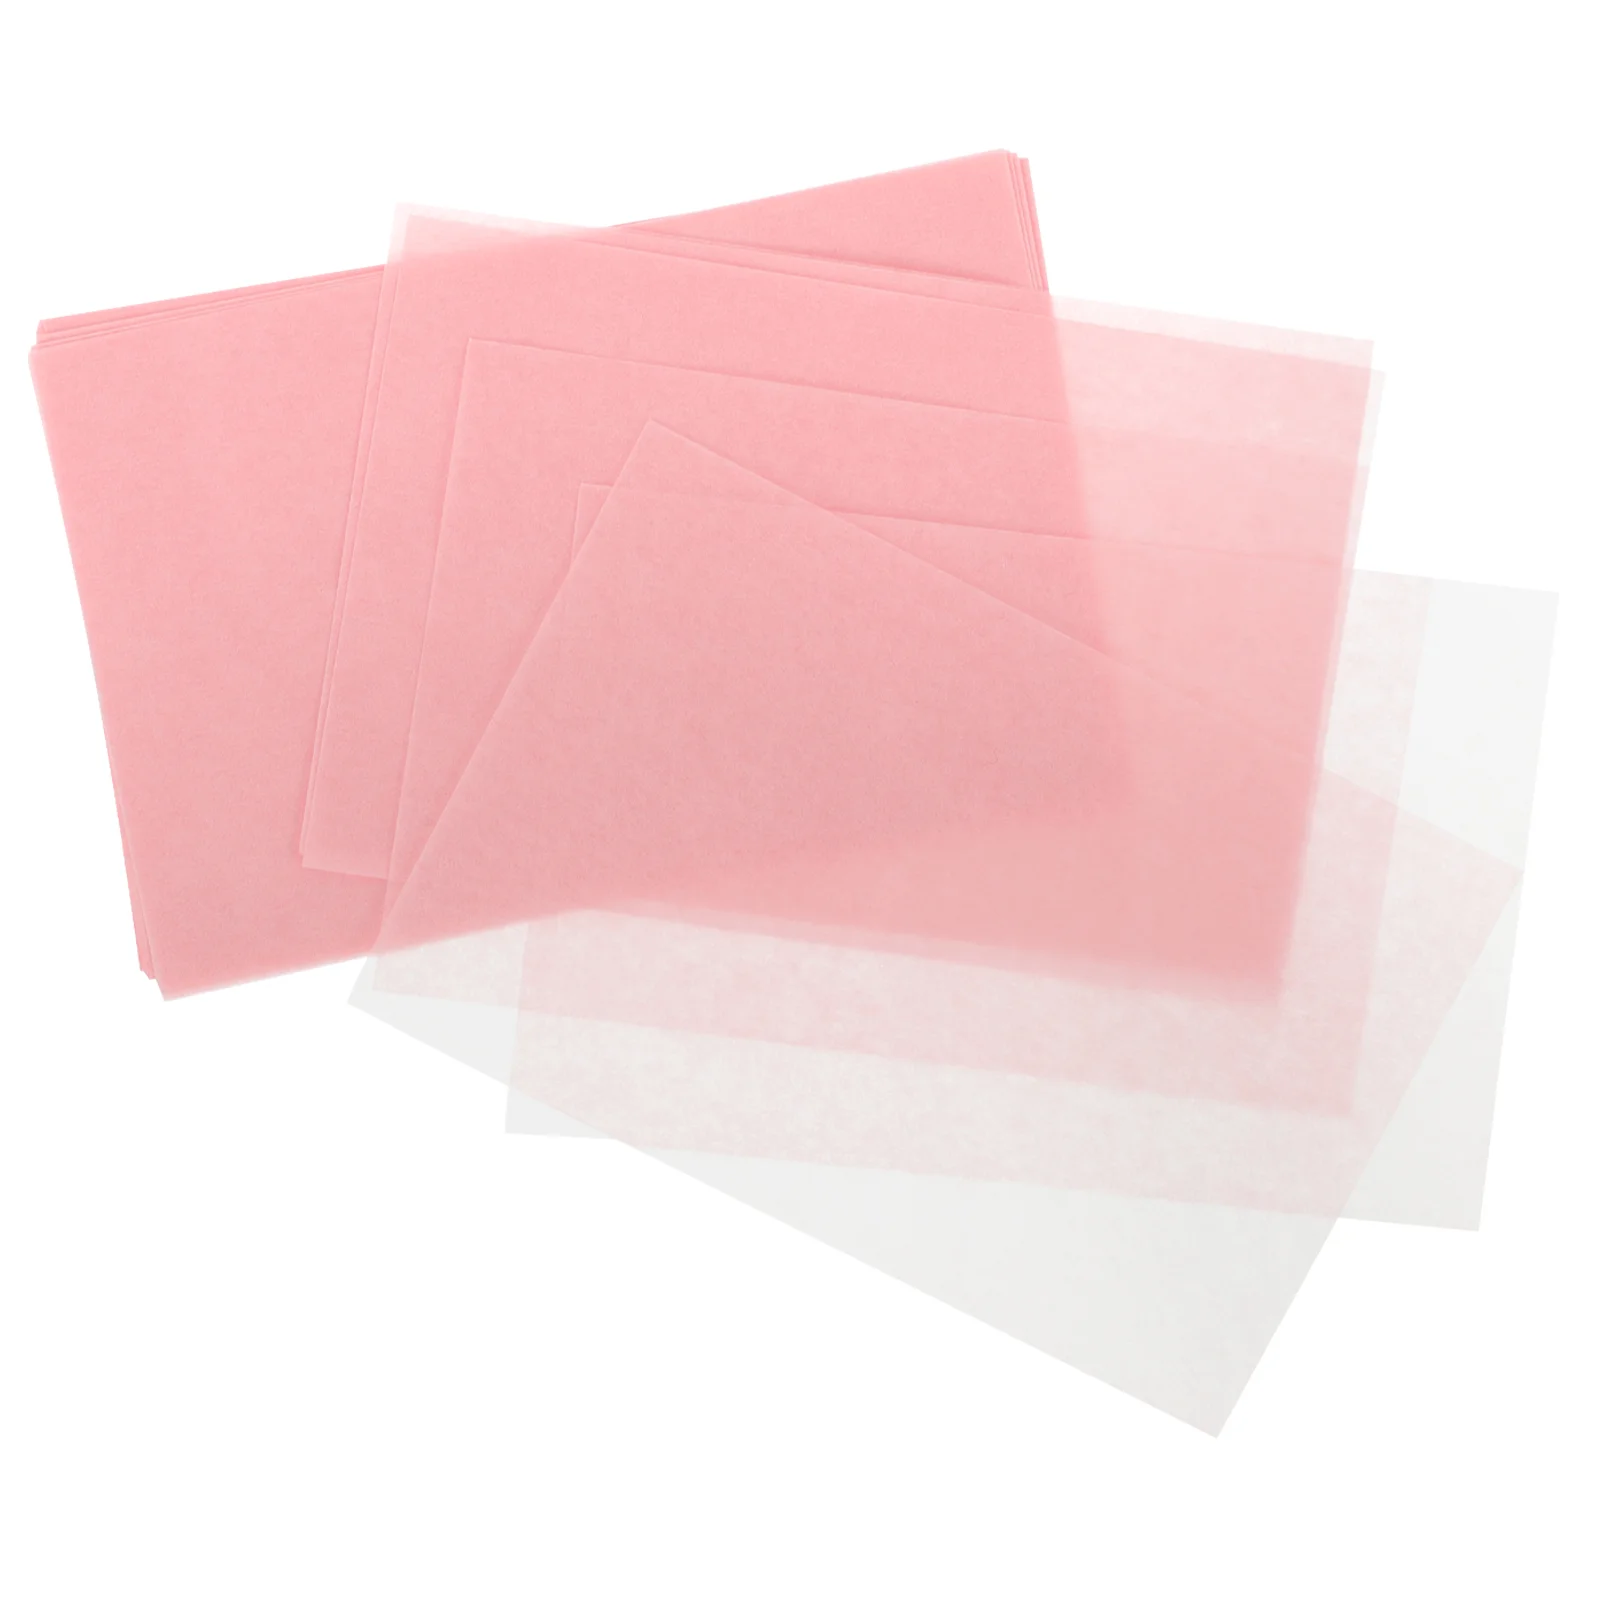 300pcs Oil Blotting Sheets Oil Absorbent Paper Facial Sucking Oil Tissues Face Oil Control Paper (Aloe Fragrance 3 Boxes) green tea oil absorbent paper facial oil control face cleansing oil blotting make up 100sheets pack